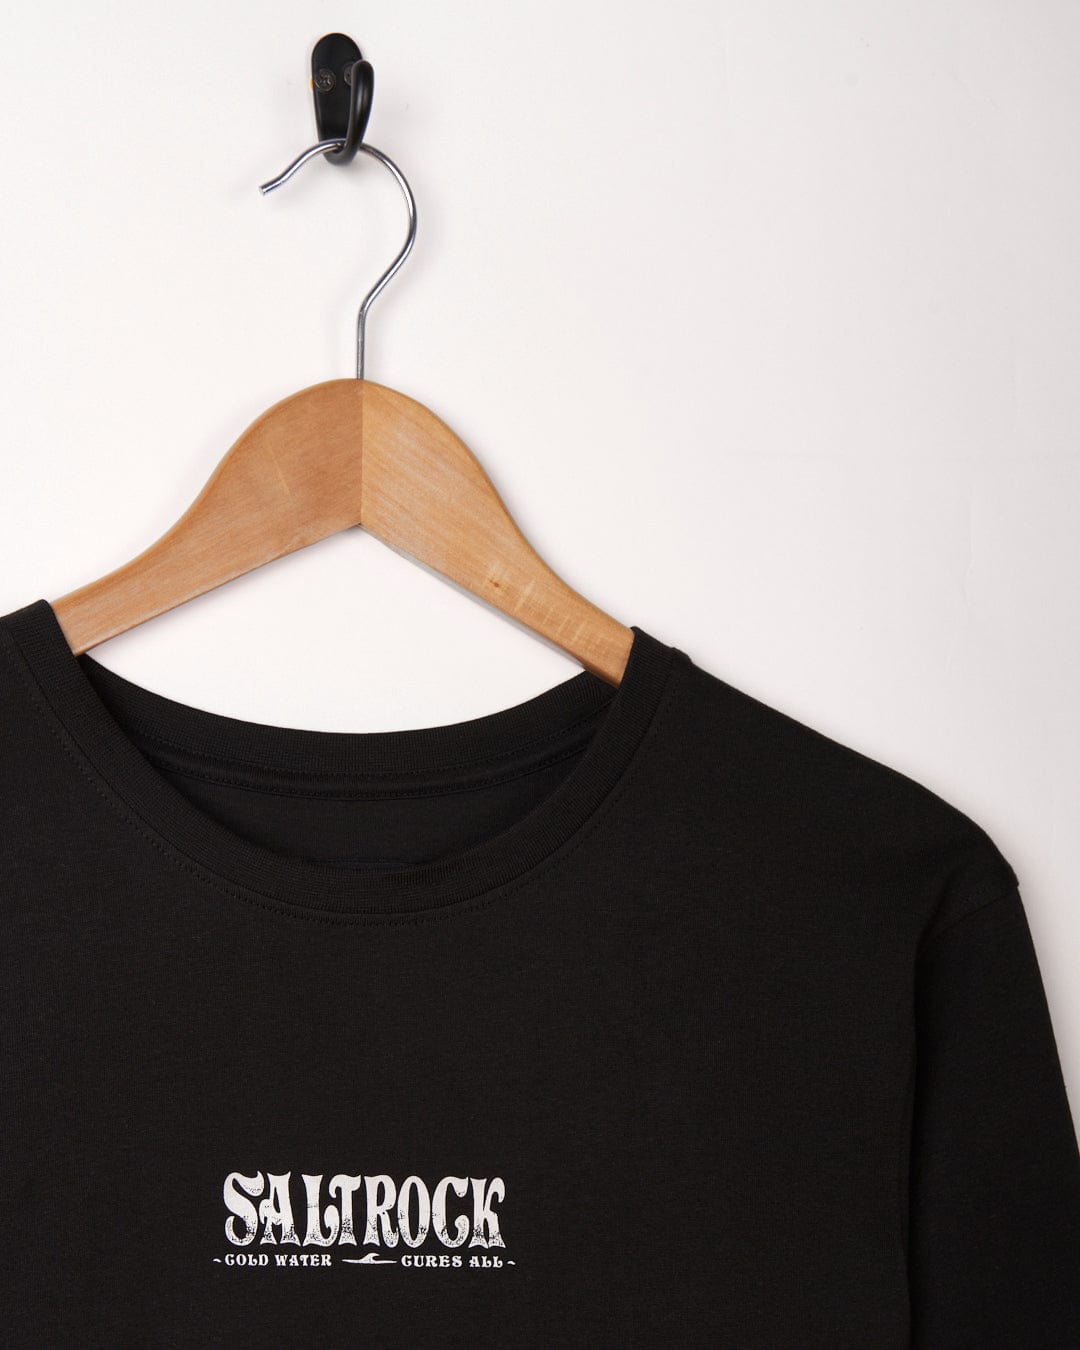 A Cold Water - Mens Short Sleeve T-Shirt in black with the Saltrock branding, known for its soft material and crew fit.